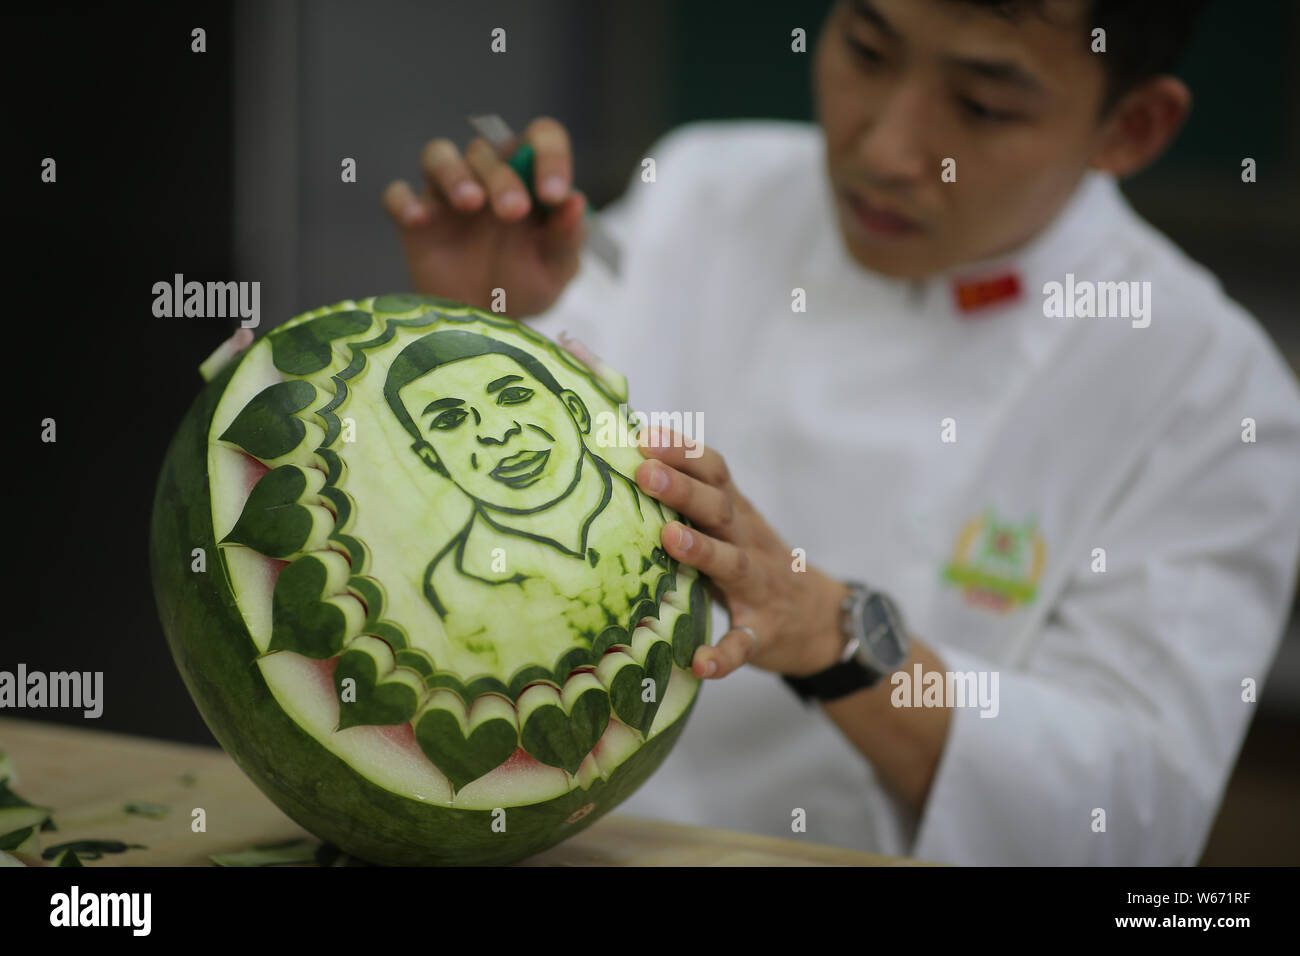 Chinese teacher Jiang Zhongmin shows watermelon carvings of French football player Kylian Mbappe in Shenyang city, northeast China's Liaoning province Stock Photo